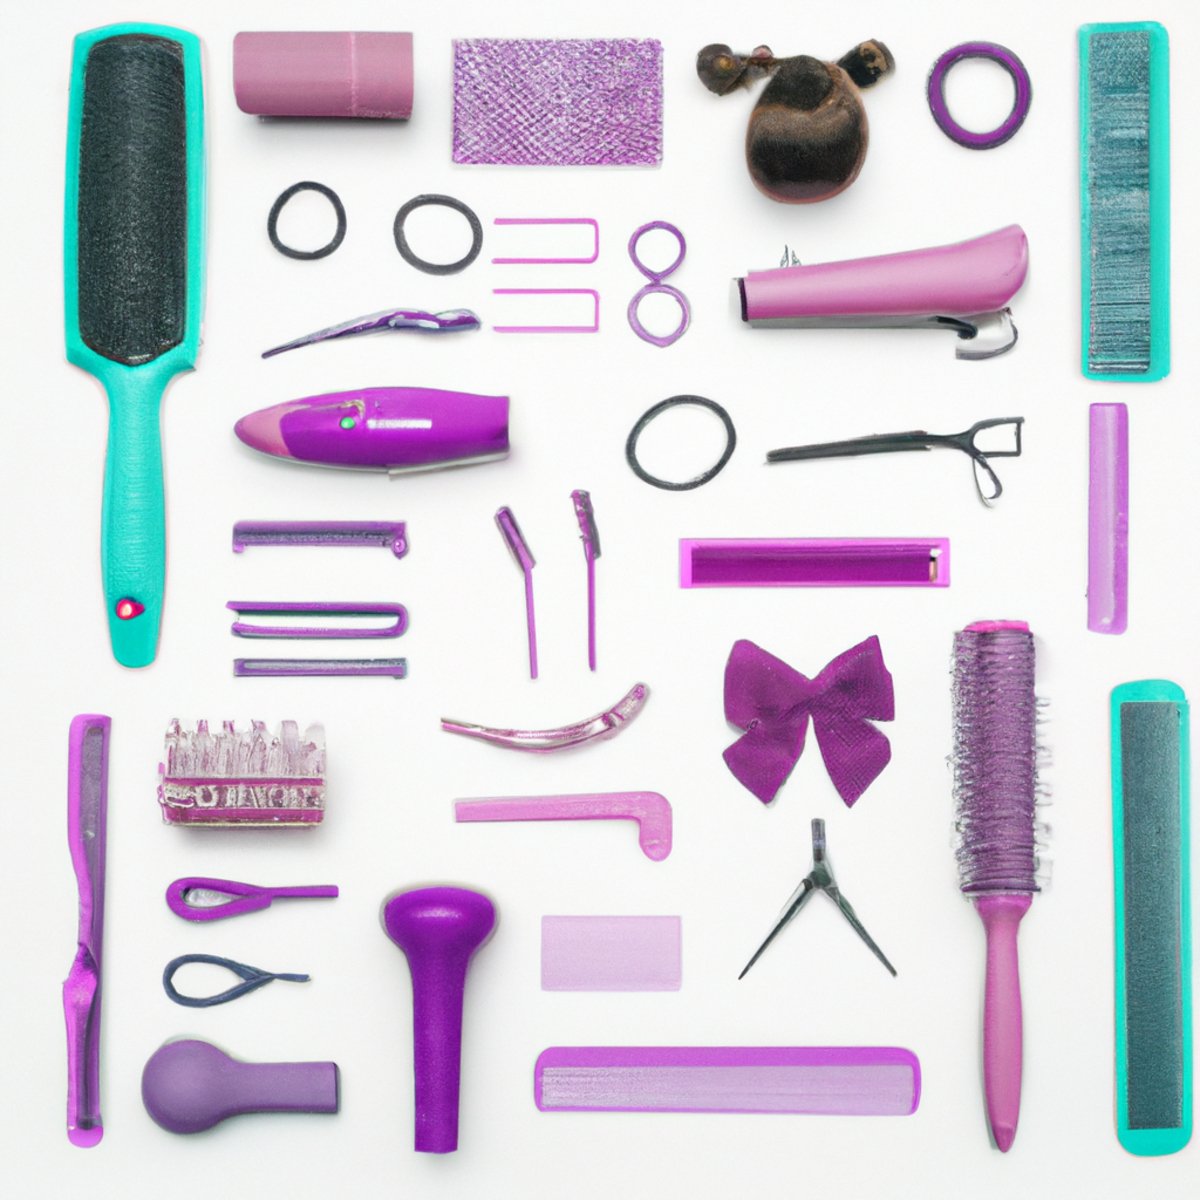 Stunning array of hair accessories on white background, showcasing tools for various hair types. Vibrant colors and intricate designs.